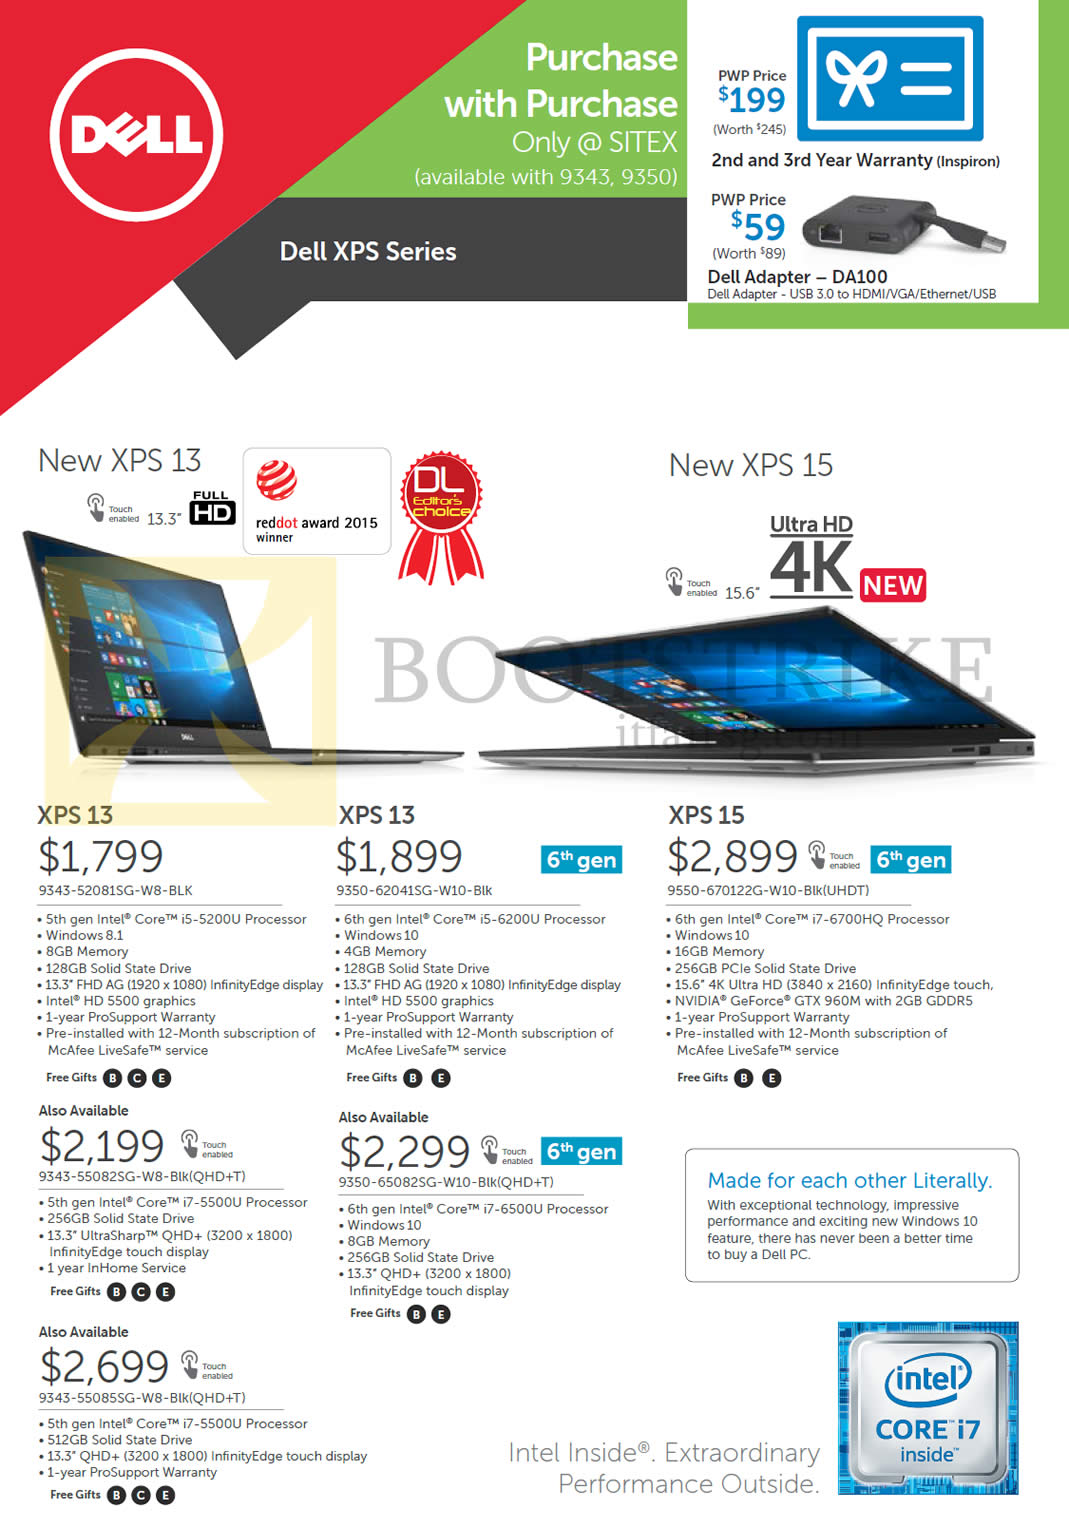 SITEX 2015 price list image brochure of Dell Notebooks, XPS13, 15, 9343-52081SG-W8-BLK, 9350-62041SG-W10-Blk, 9550-670122G-W10-Blk, 9343-55082SG-W8-Blk, 9350-65082SG-W10-Blk, 9343-55085SG-W8-Blk